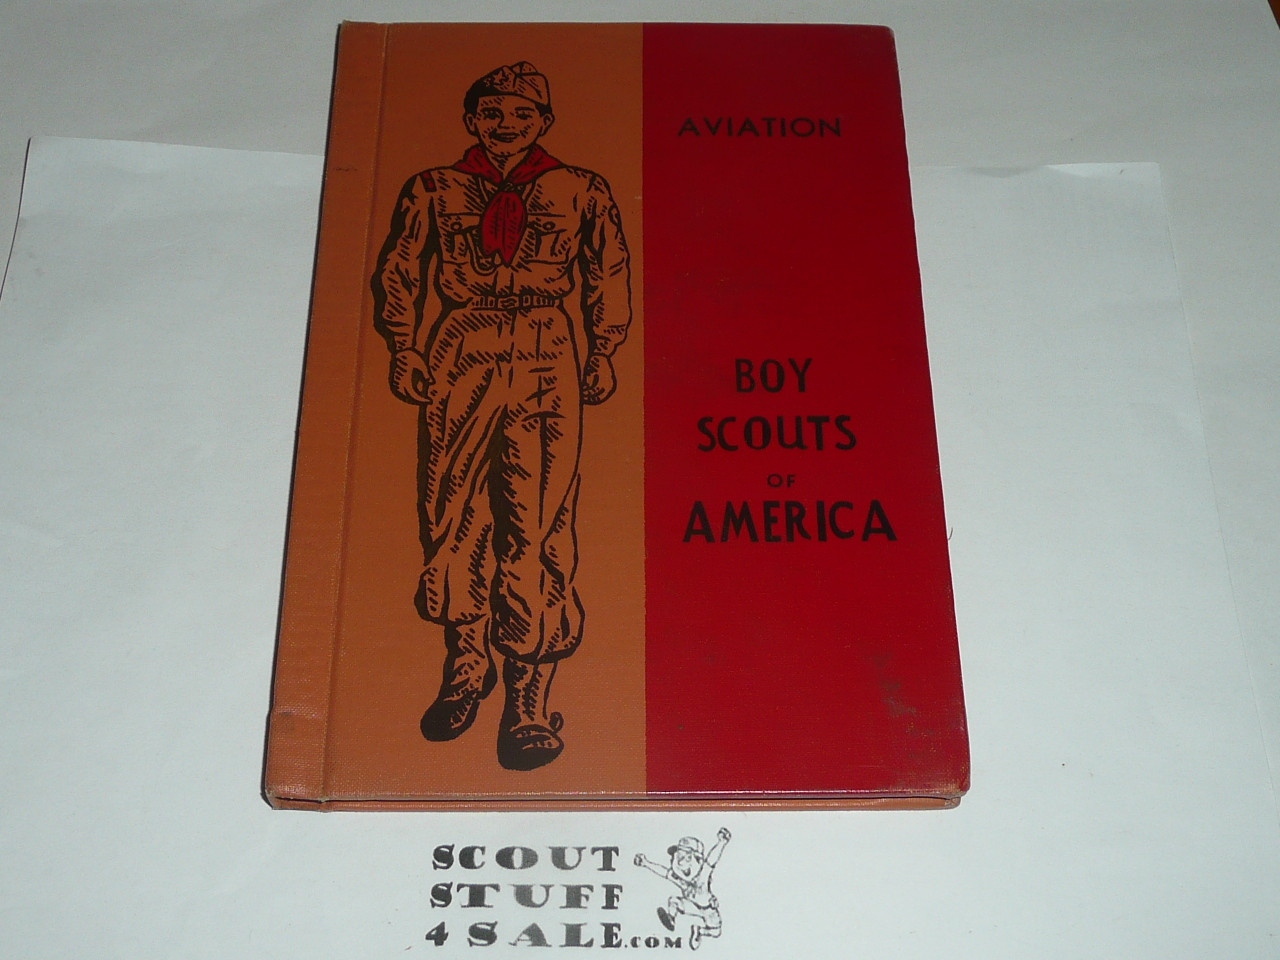 Aviation Library Bound Merit Badge Pamphlet, Type 6, Picture Top Red Bottom Cover, 1-54 Printing